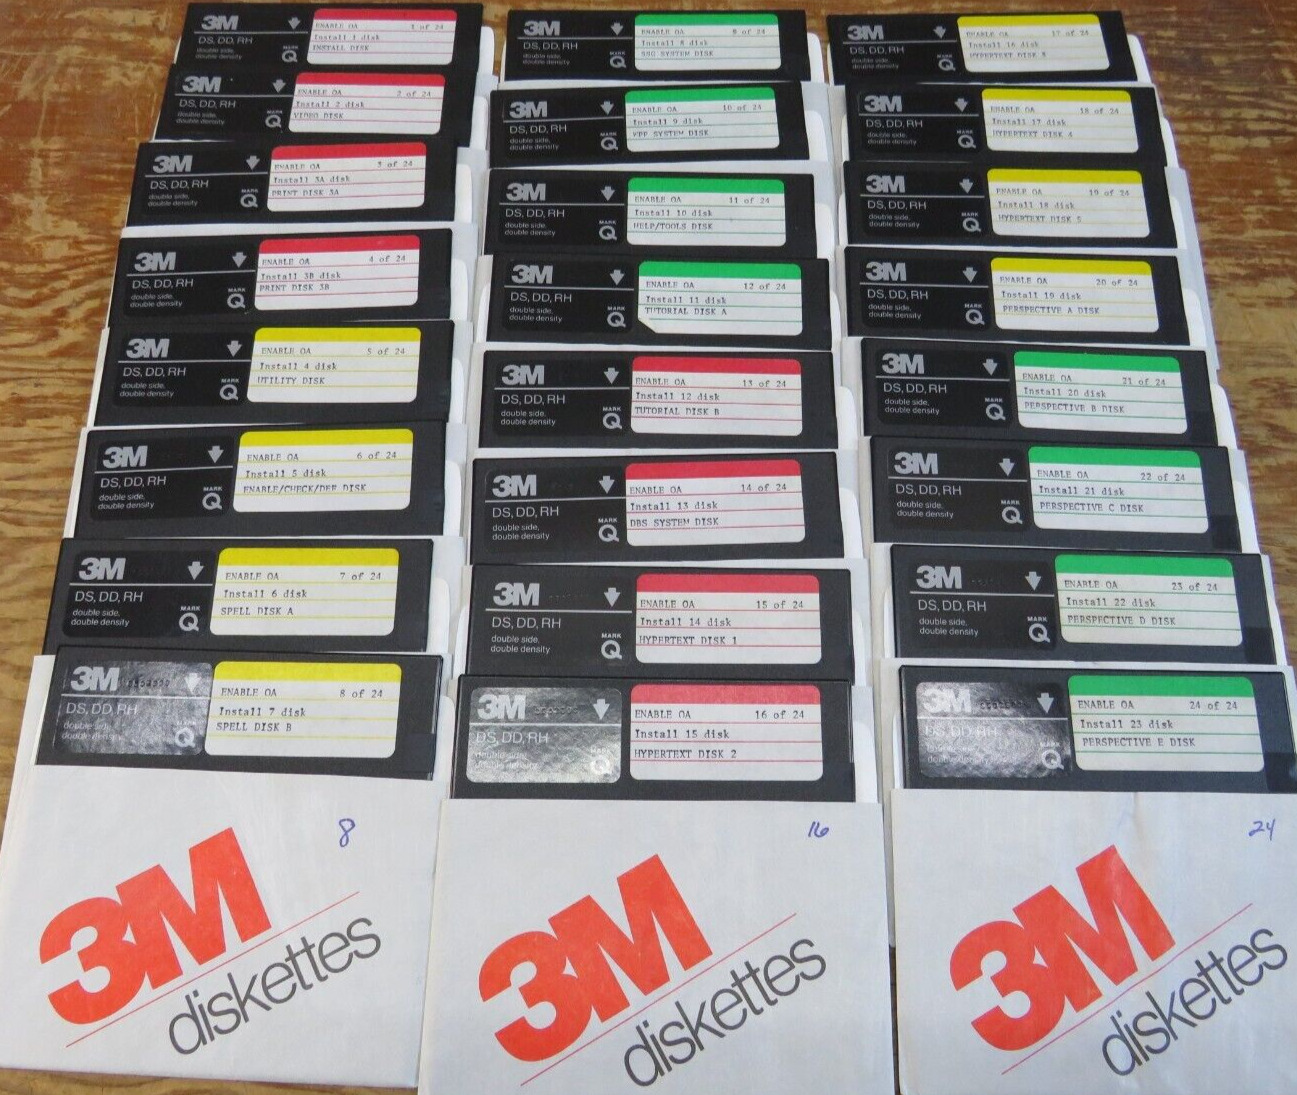 Vintage 3M Enable OA Office Automation 5.25 Floppy Disks Computer PC